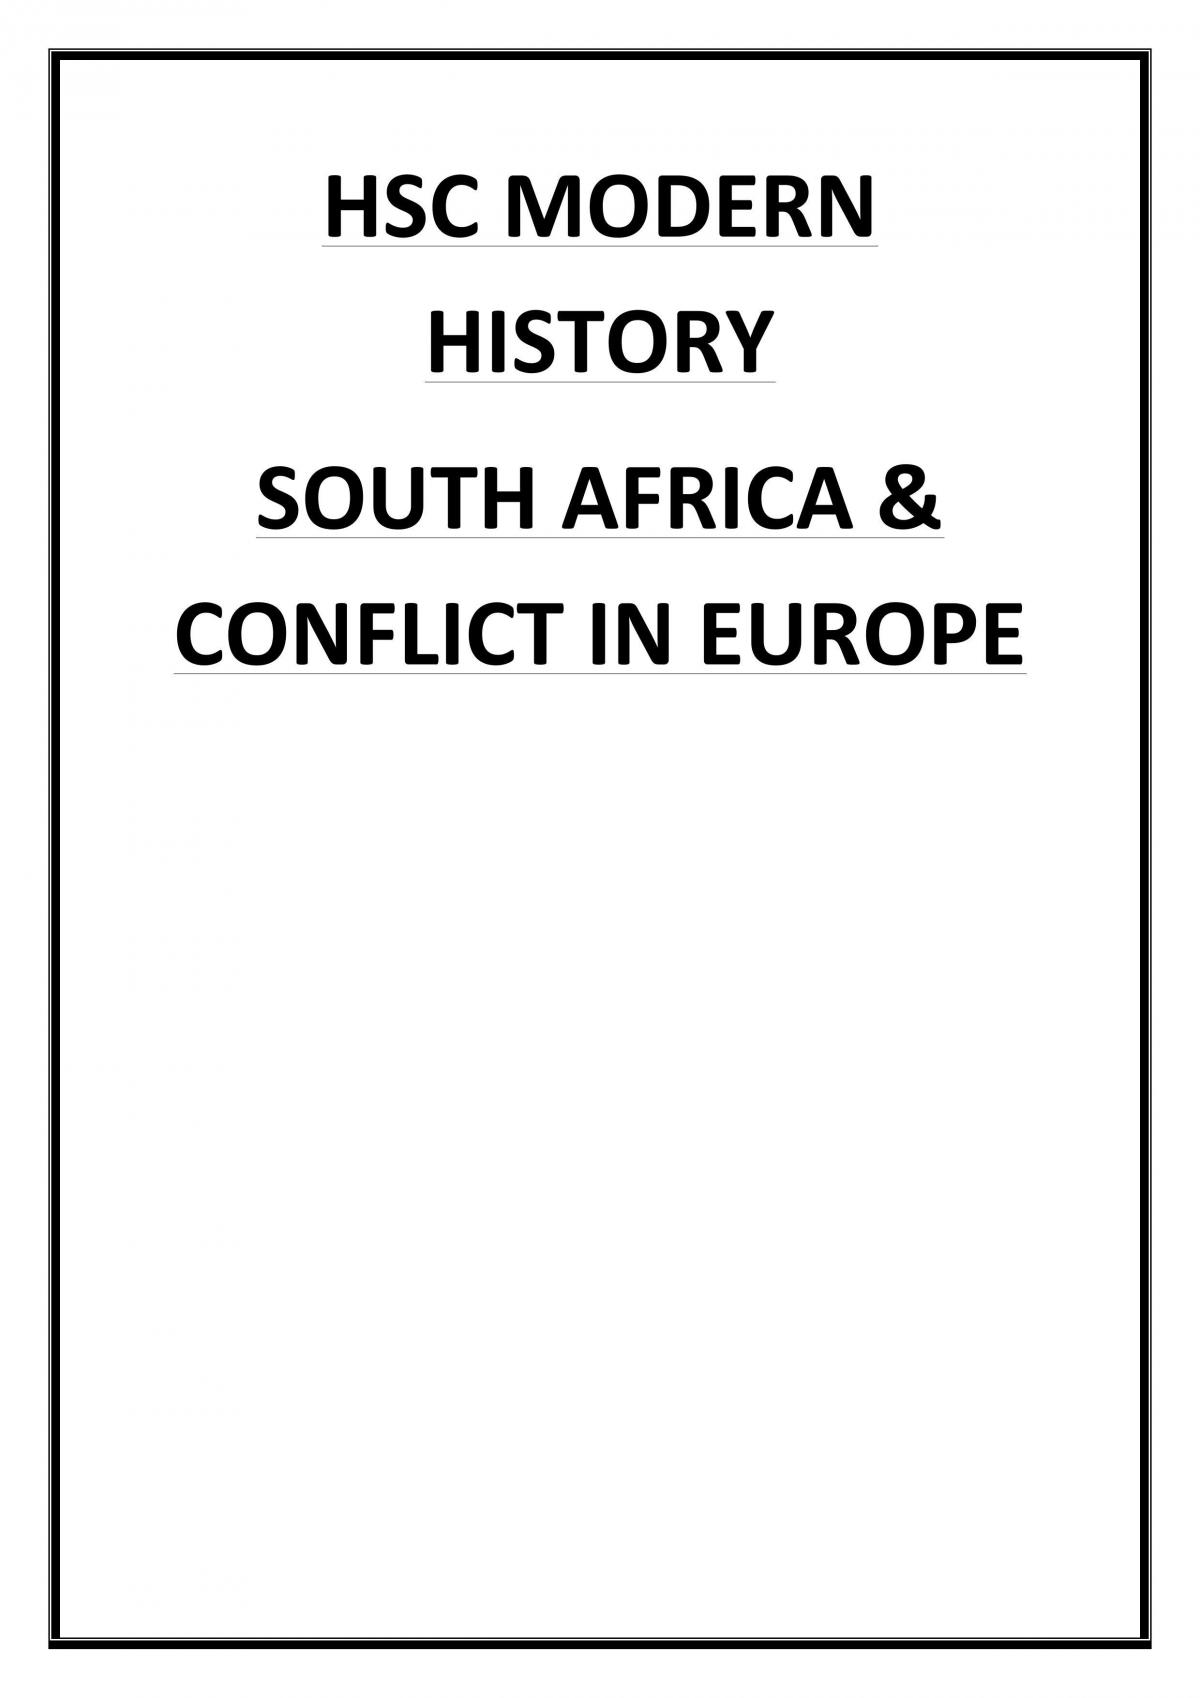 HSC Modern History: Conflict in Europe and South Africa